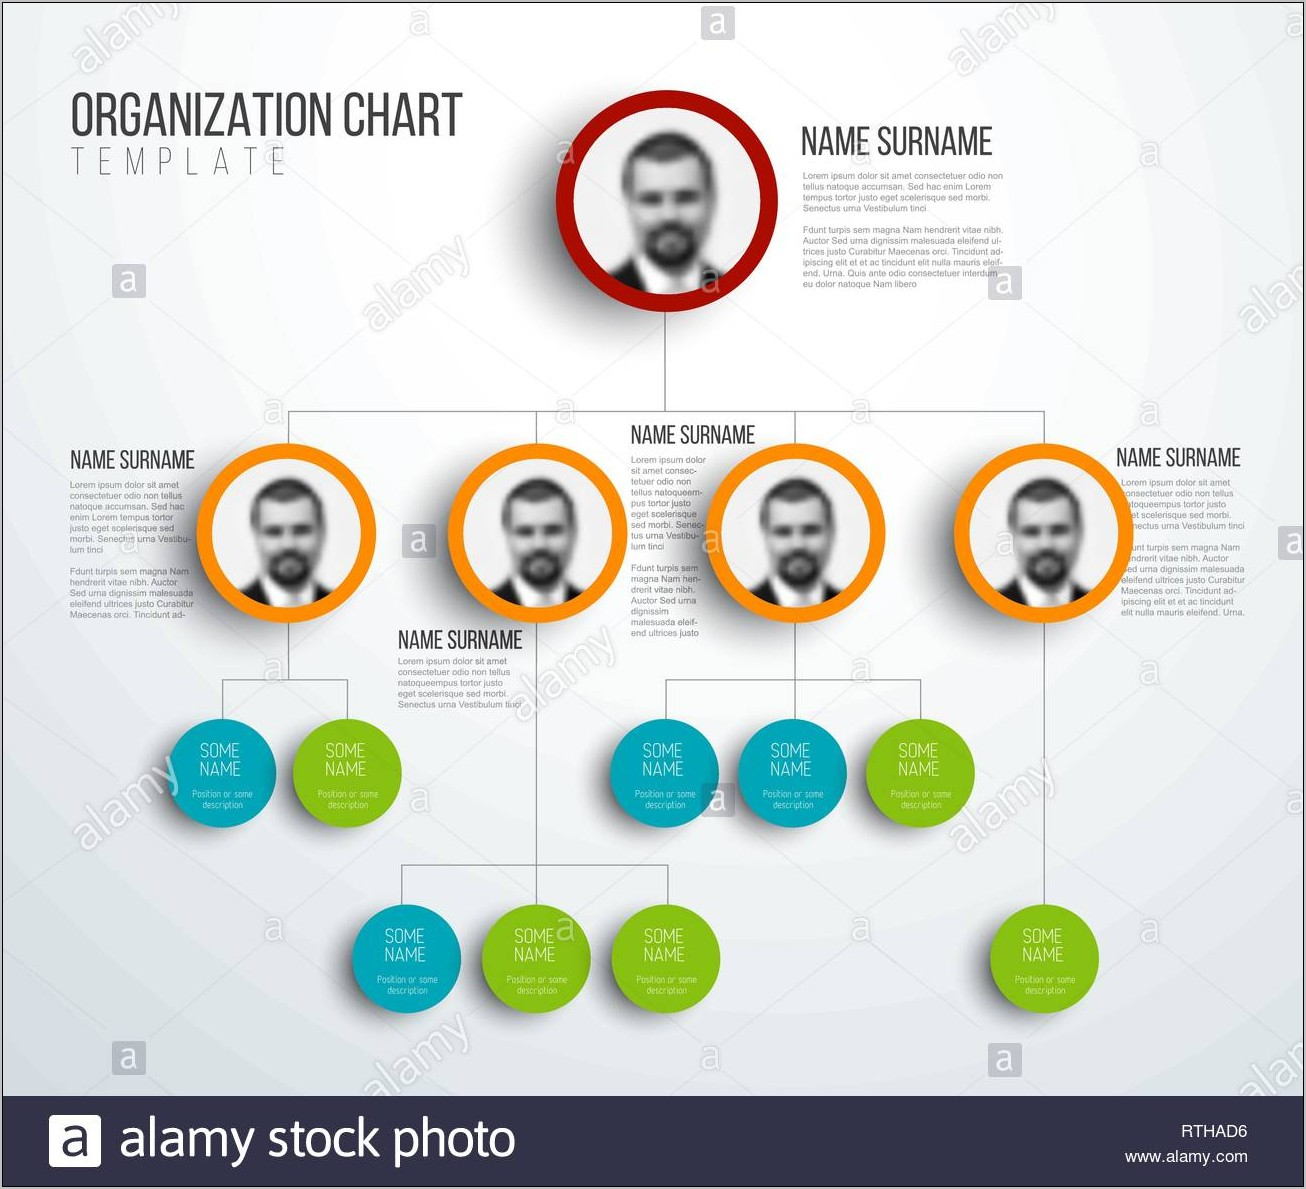 Organization Hierarchy Chart Template